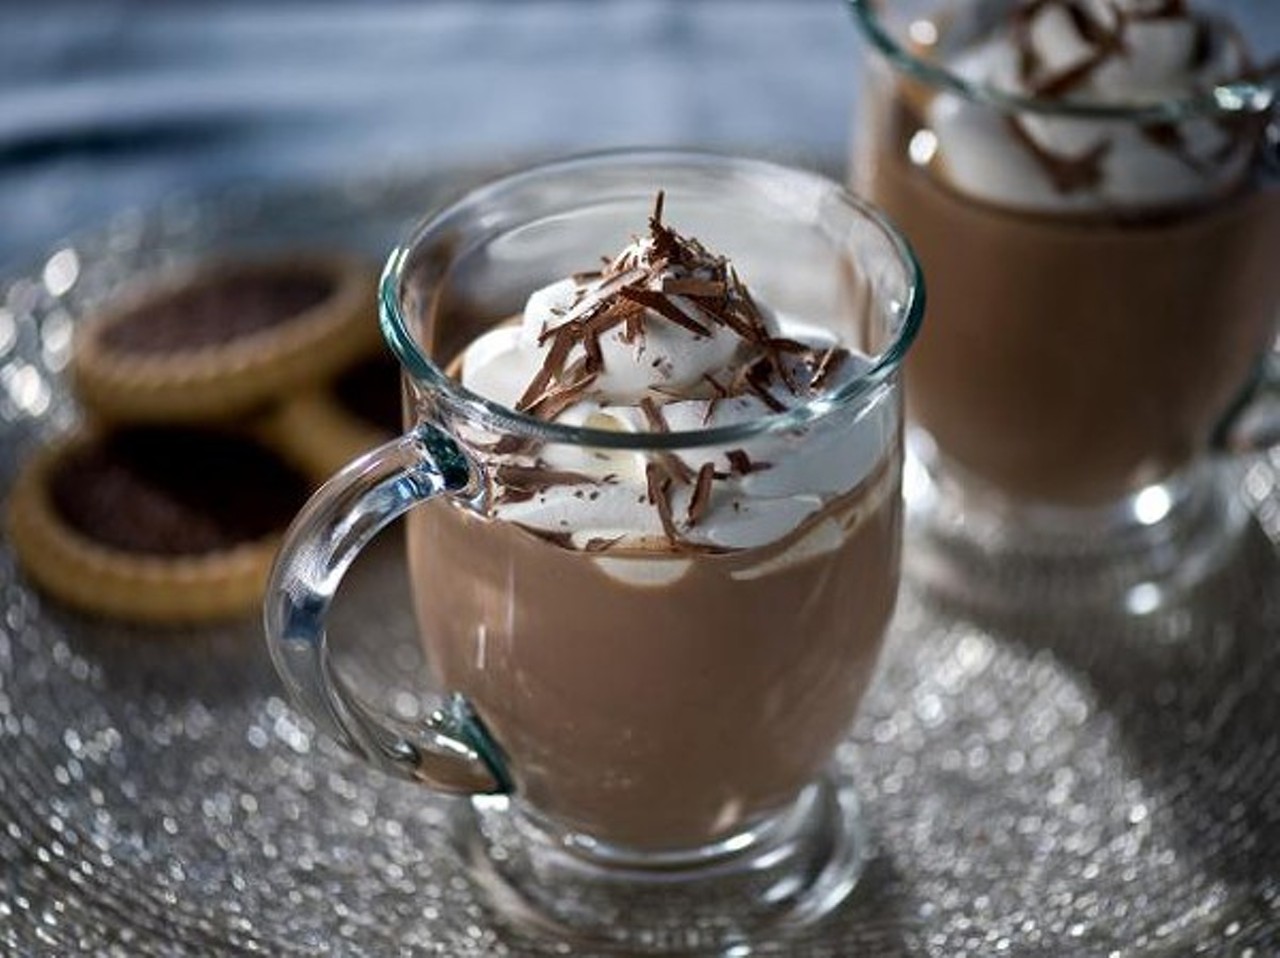 Hoppin’ Hot Scotch - This is some good ol’ hot chocolate with butterscotch schnapps, because you’ll need to keep warm when you head outside to escape your family walk off dinner. Find the recipe at Food Network.